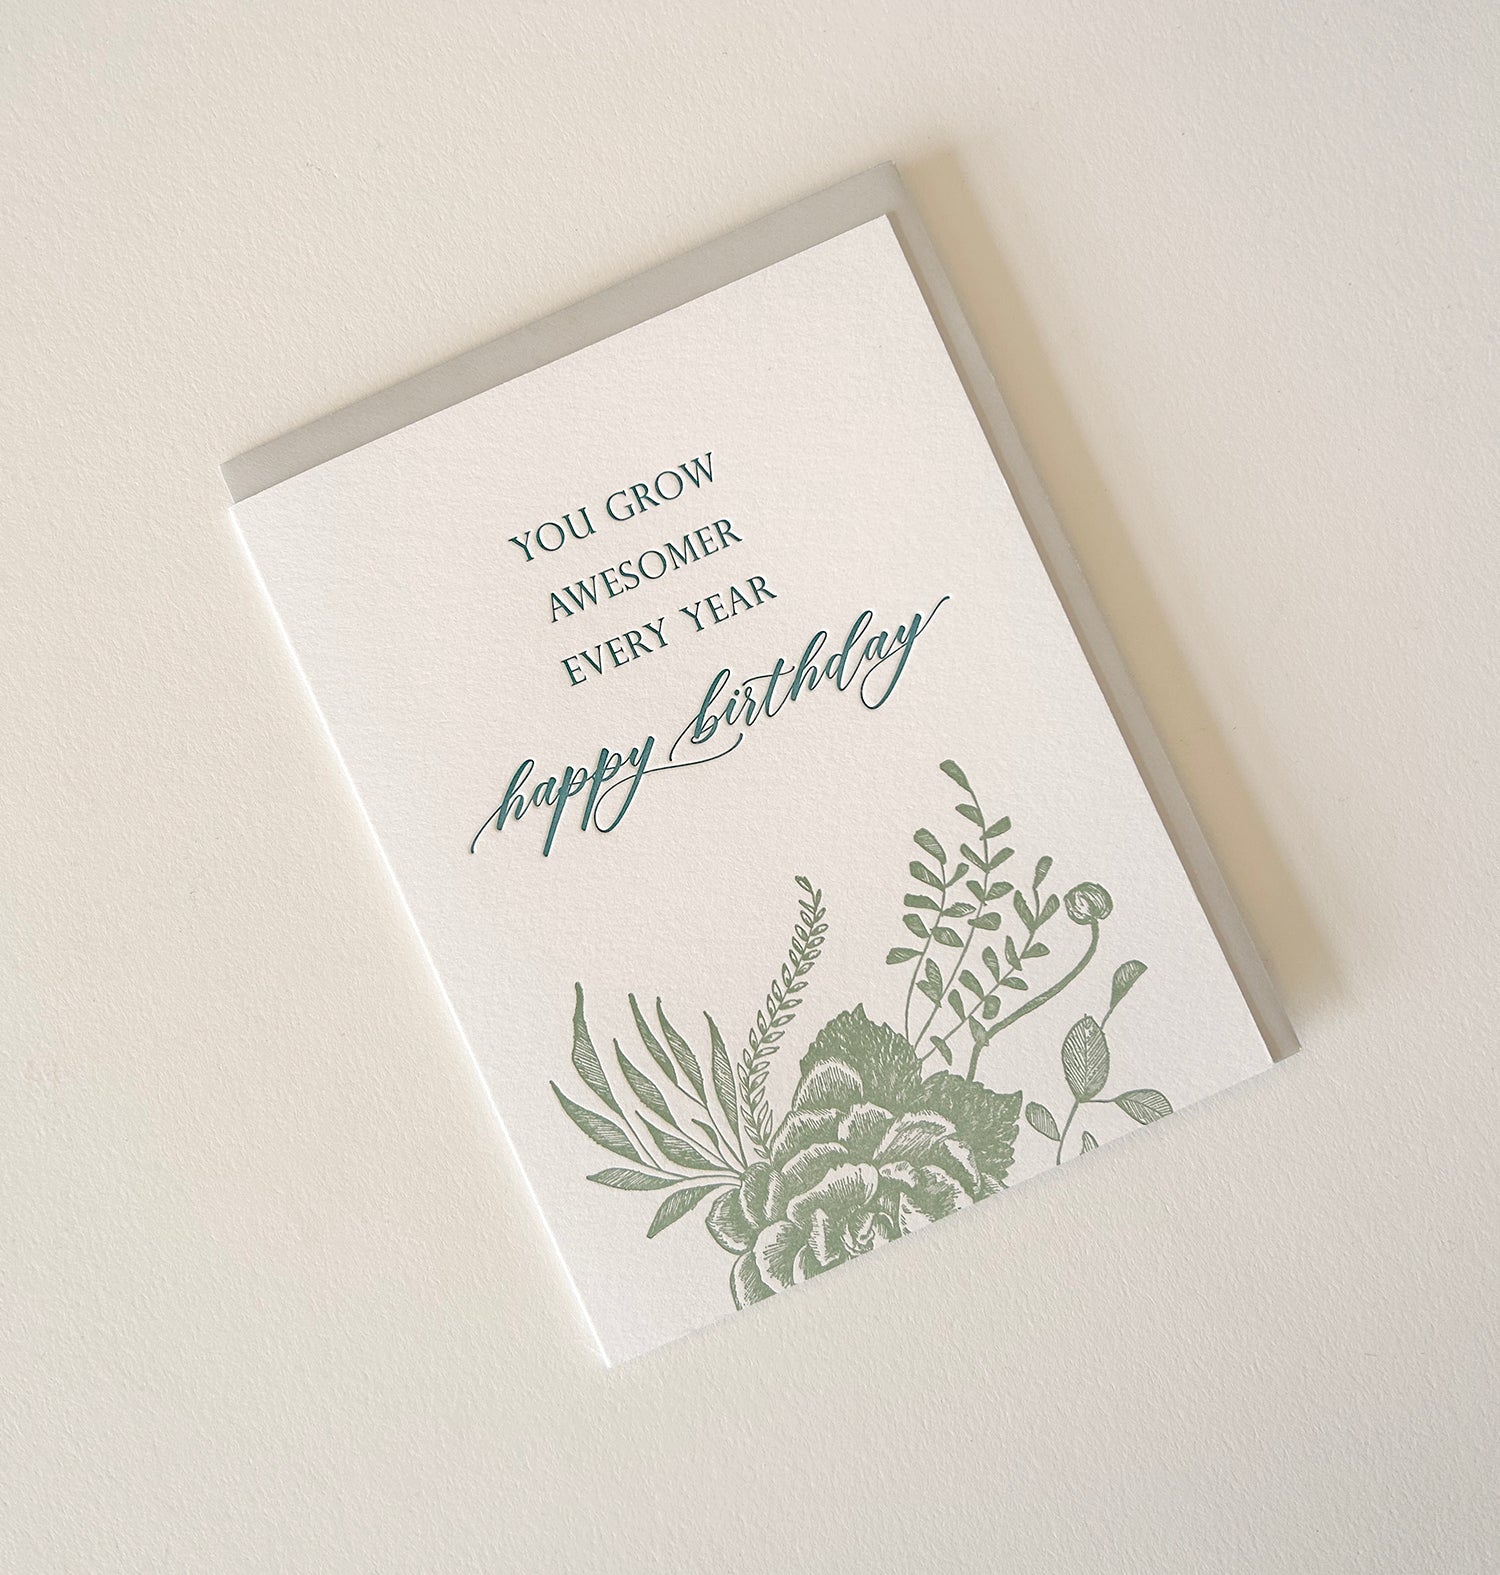 Letterpress birthday card with florals that says " You grow awesomer every year happy birthday" by Rust Belt Love